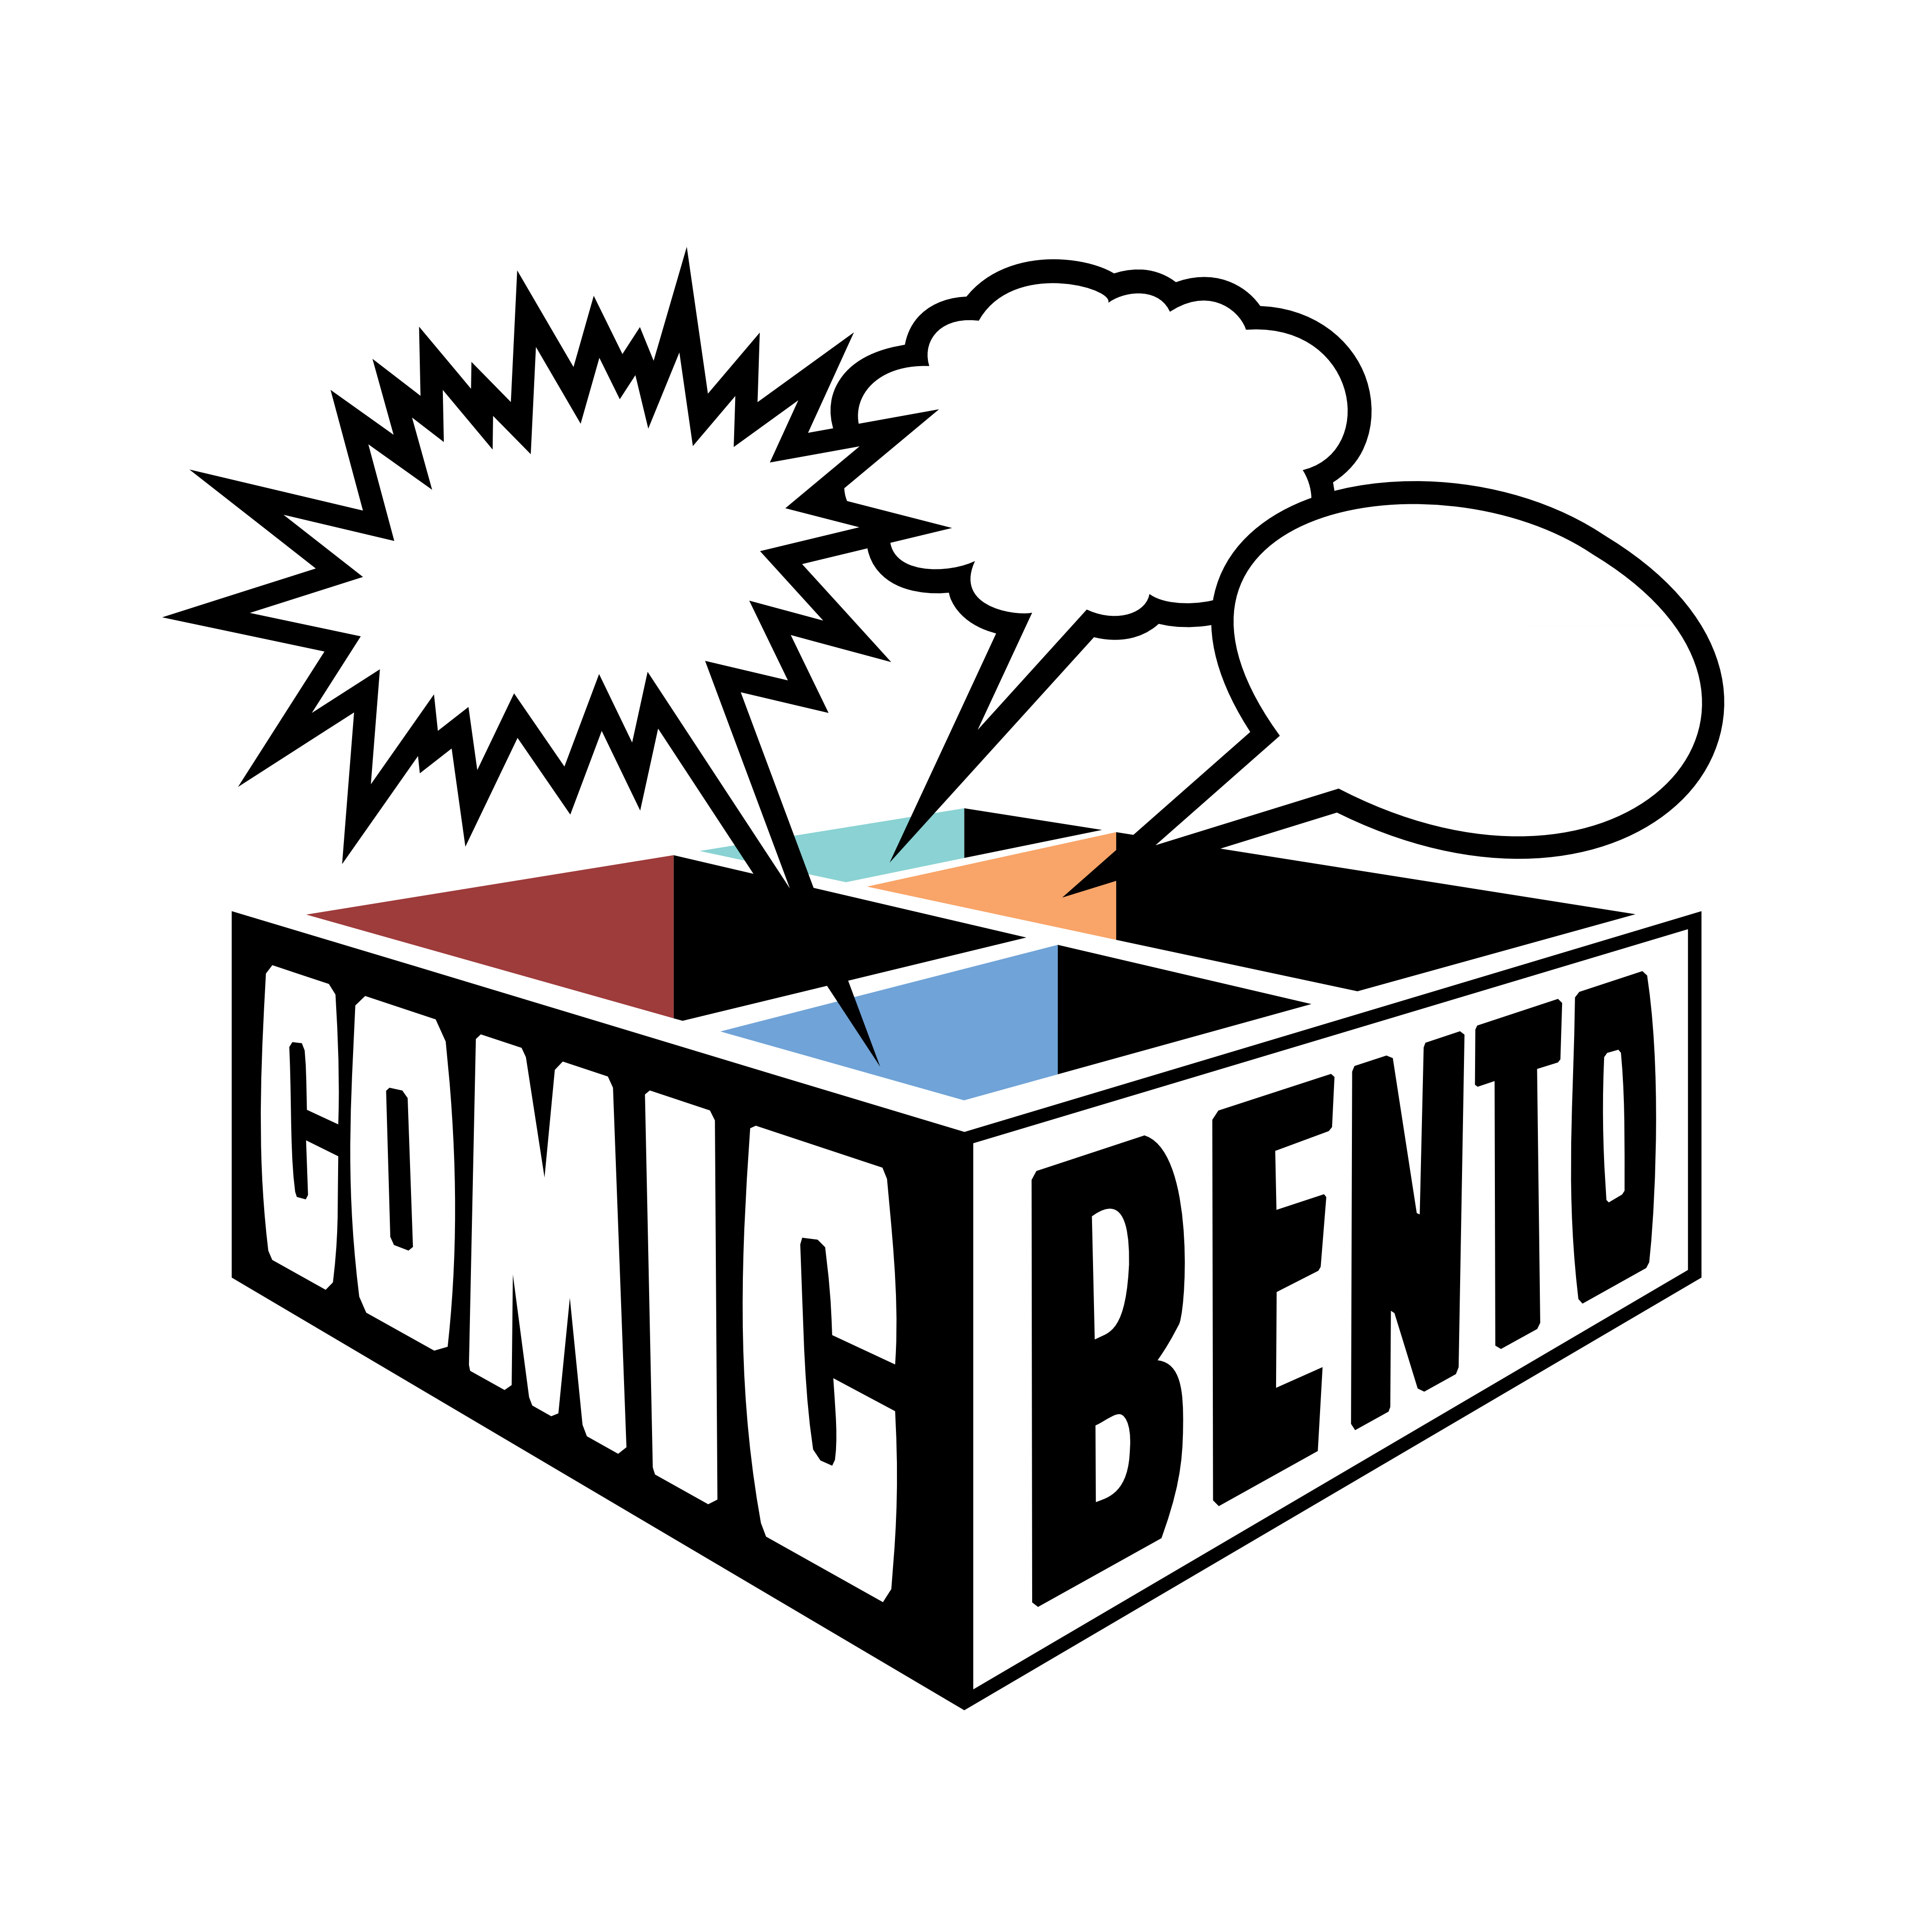 Geek insider, geekinsider, geekinsider. Com,, comic bento is the thing you never knew you needed - so i'm telling you, comics